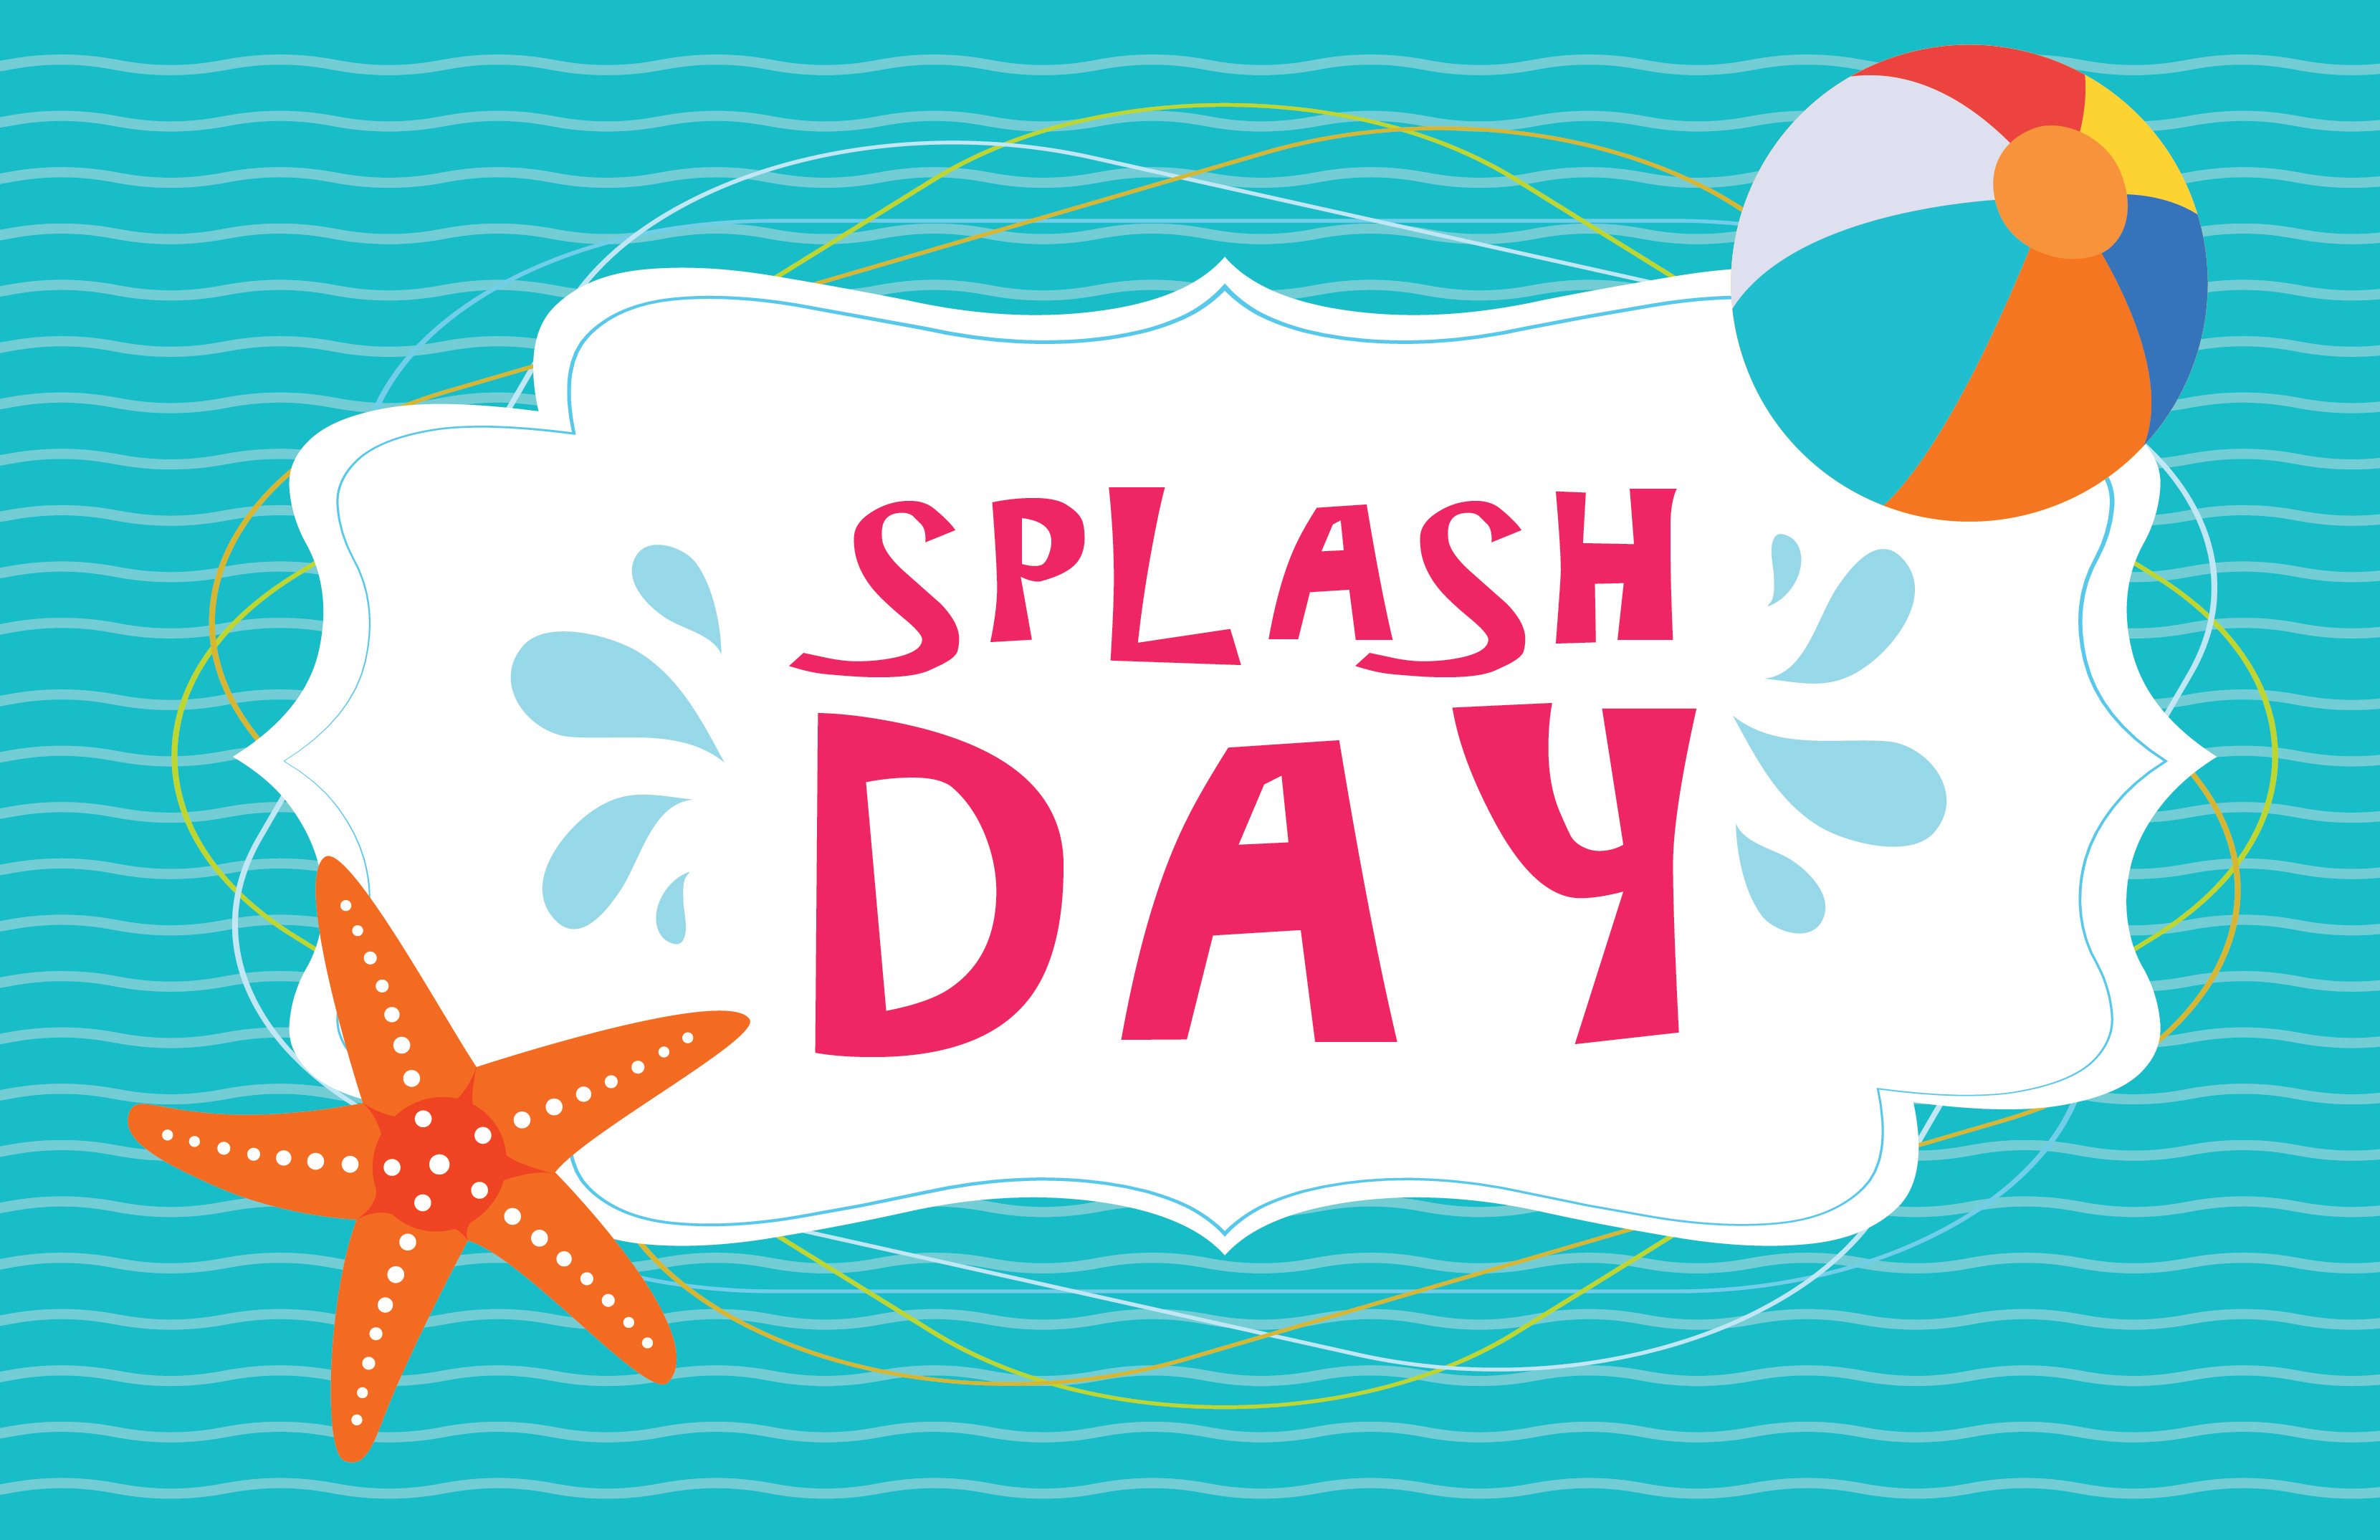 Dive into Summer Fun at Memorial Parkway's Splash Day Event on June 15